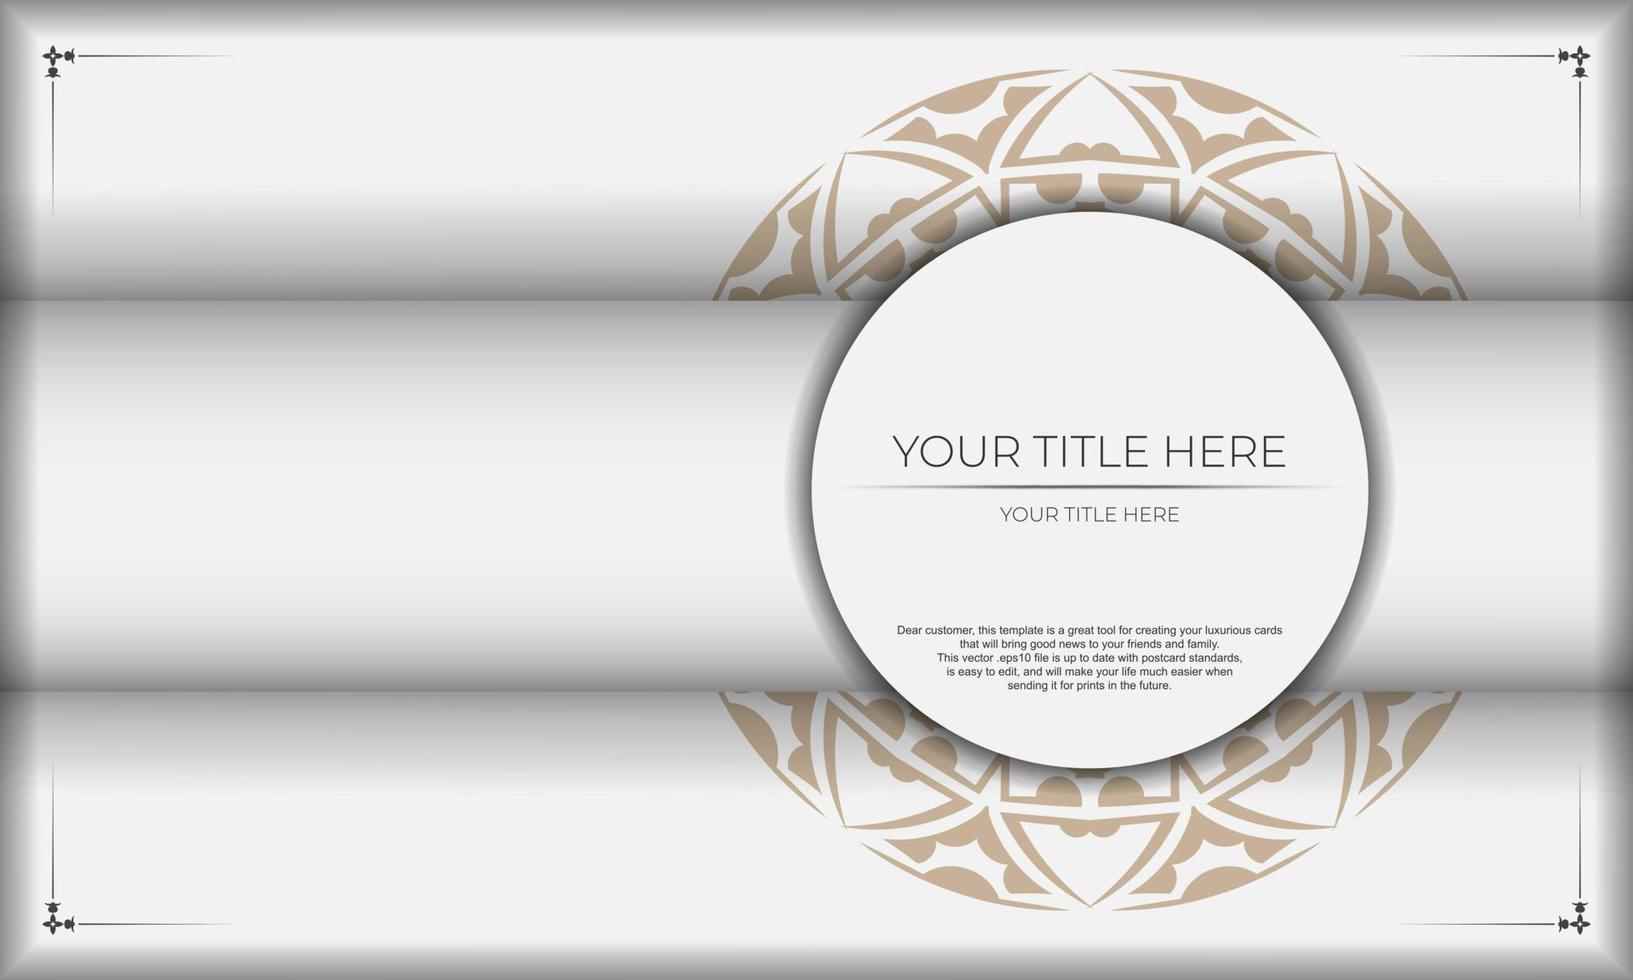 Postcard design with Greek patterns. White banner with ornaments and place for your text and logo. vector